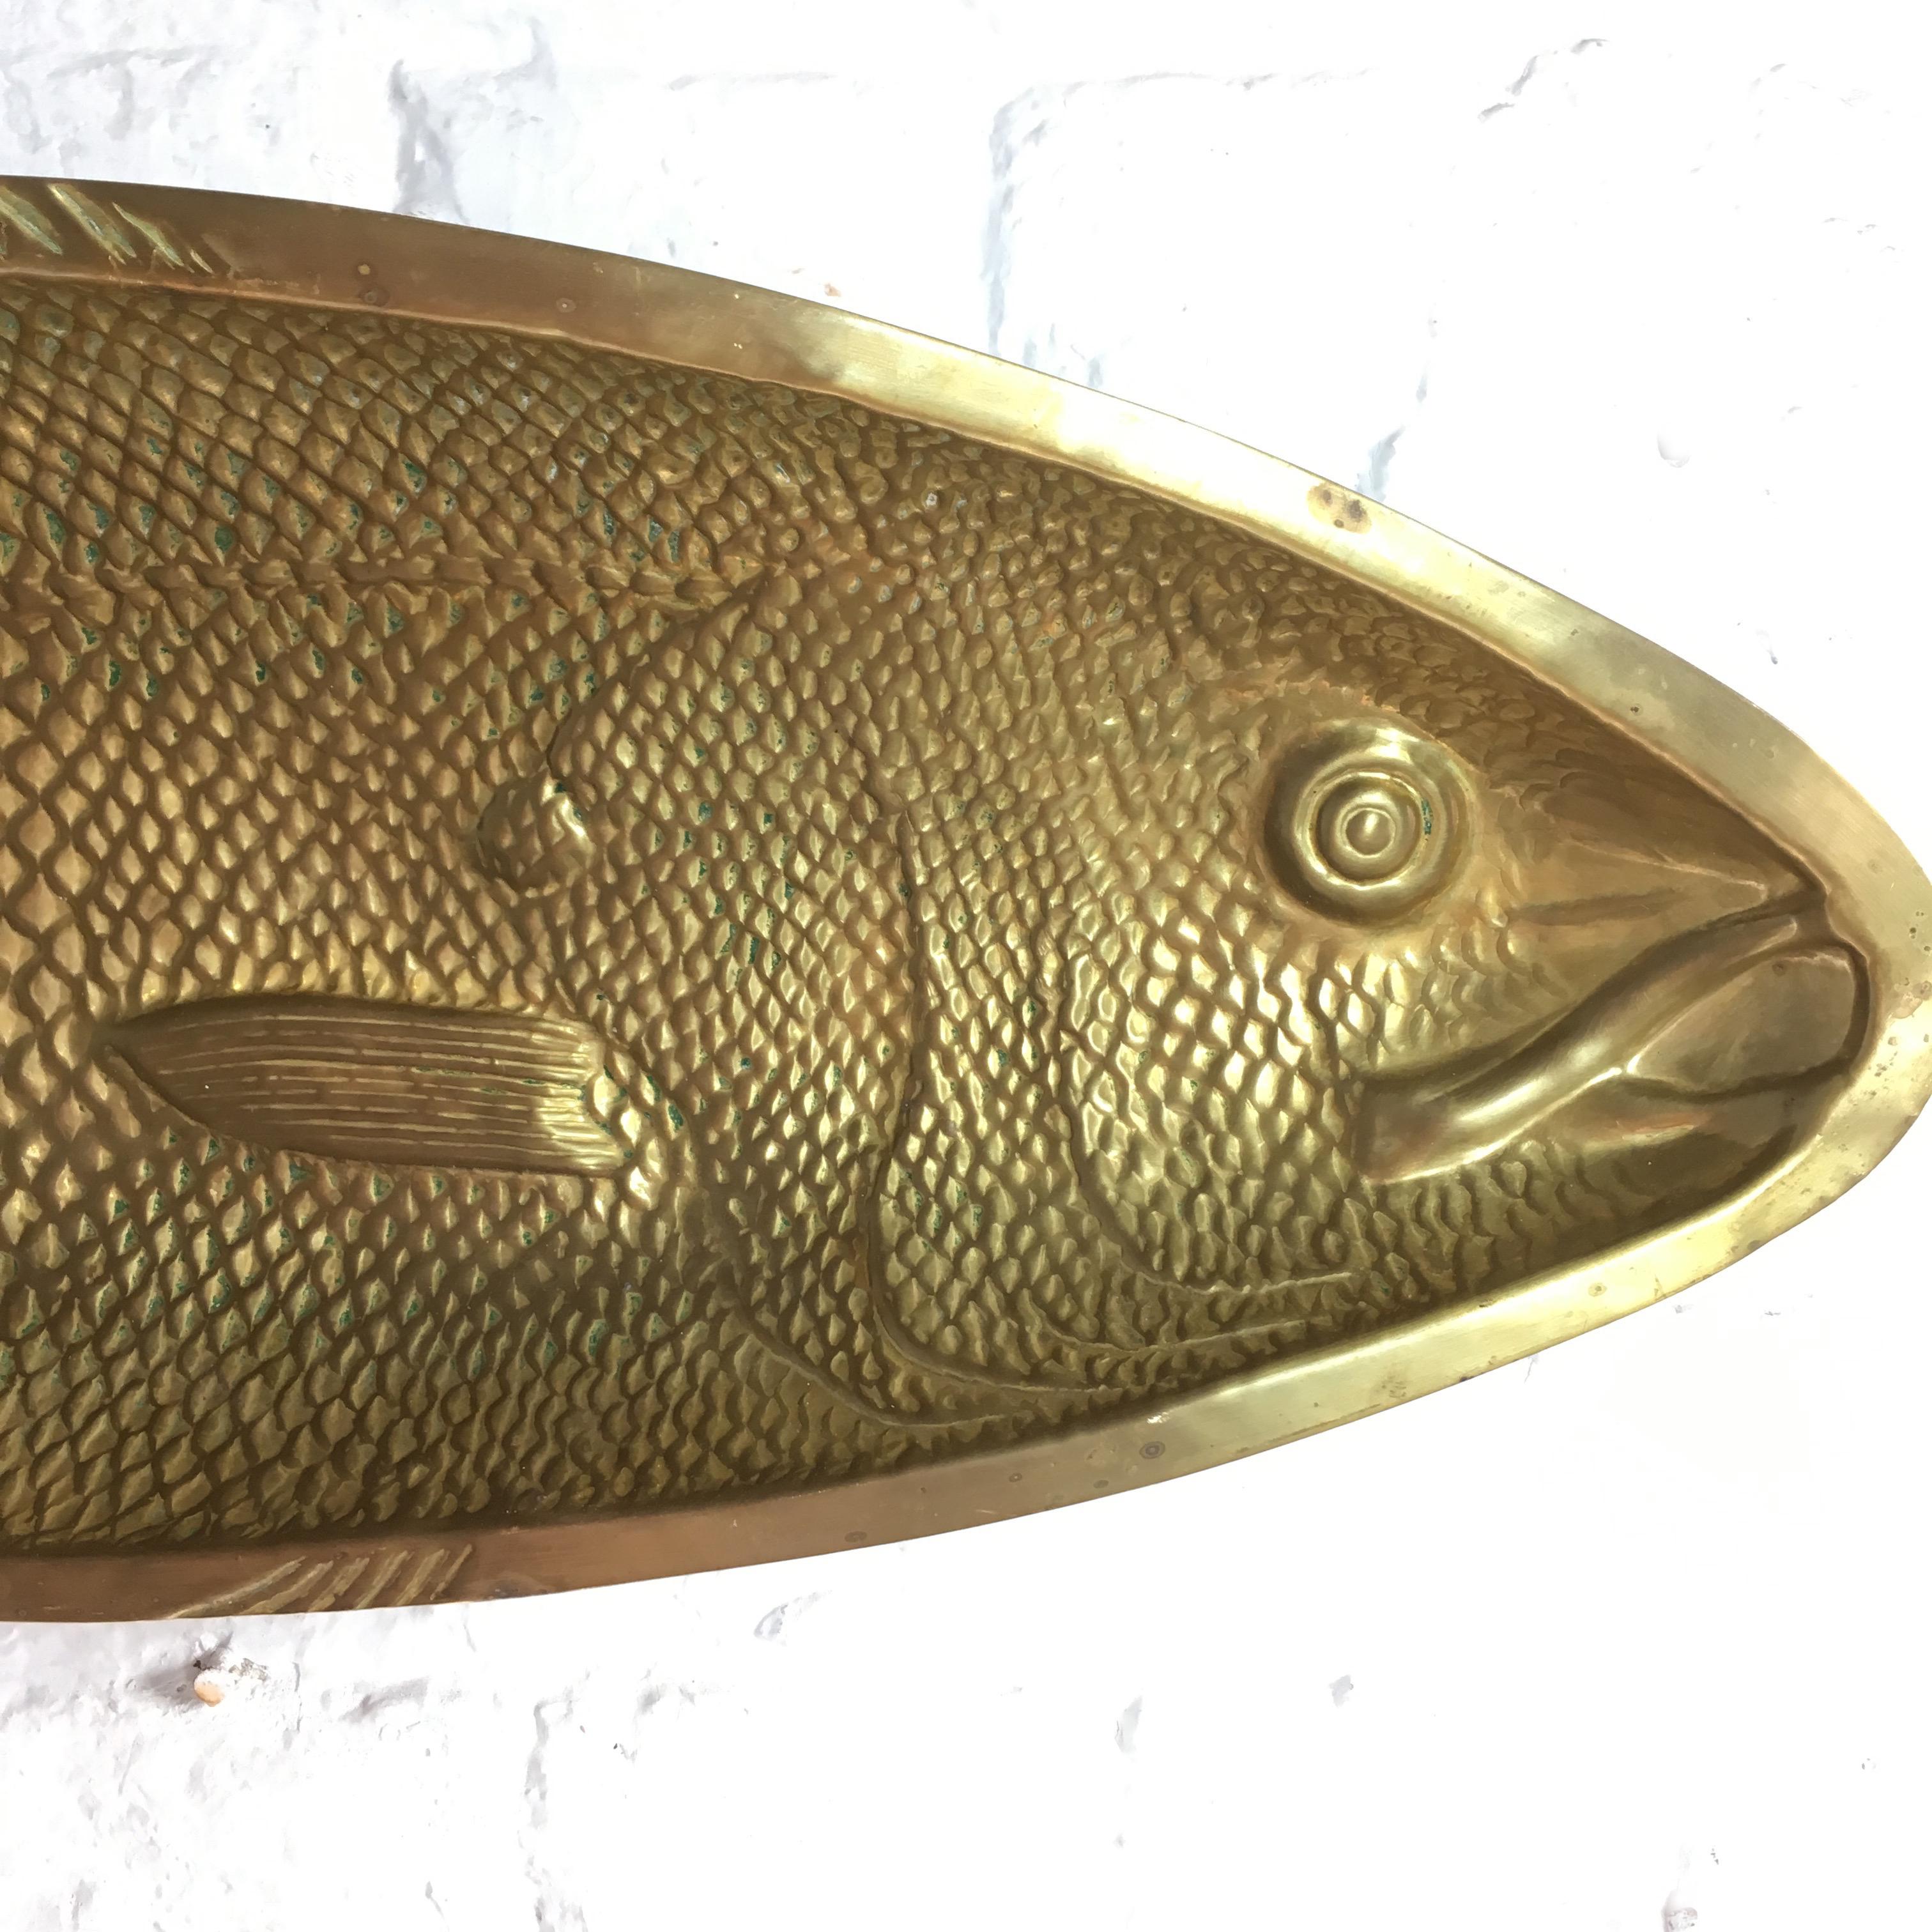 'Valenti Spain' large brass fish dish
Spain
Midcentury
This large size brass fish dish is a superb piece of midcentury design
Stamped 'Valenti, made in Spain' on the underside
There are 4 small ball feet to the underside, there is also a string